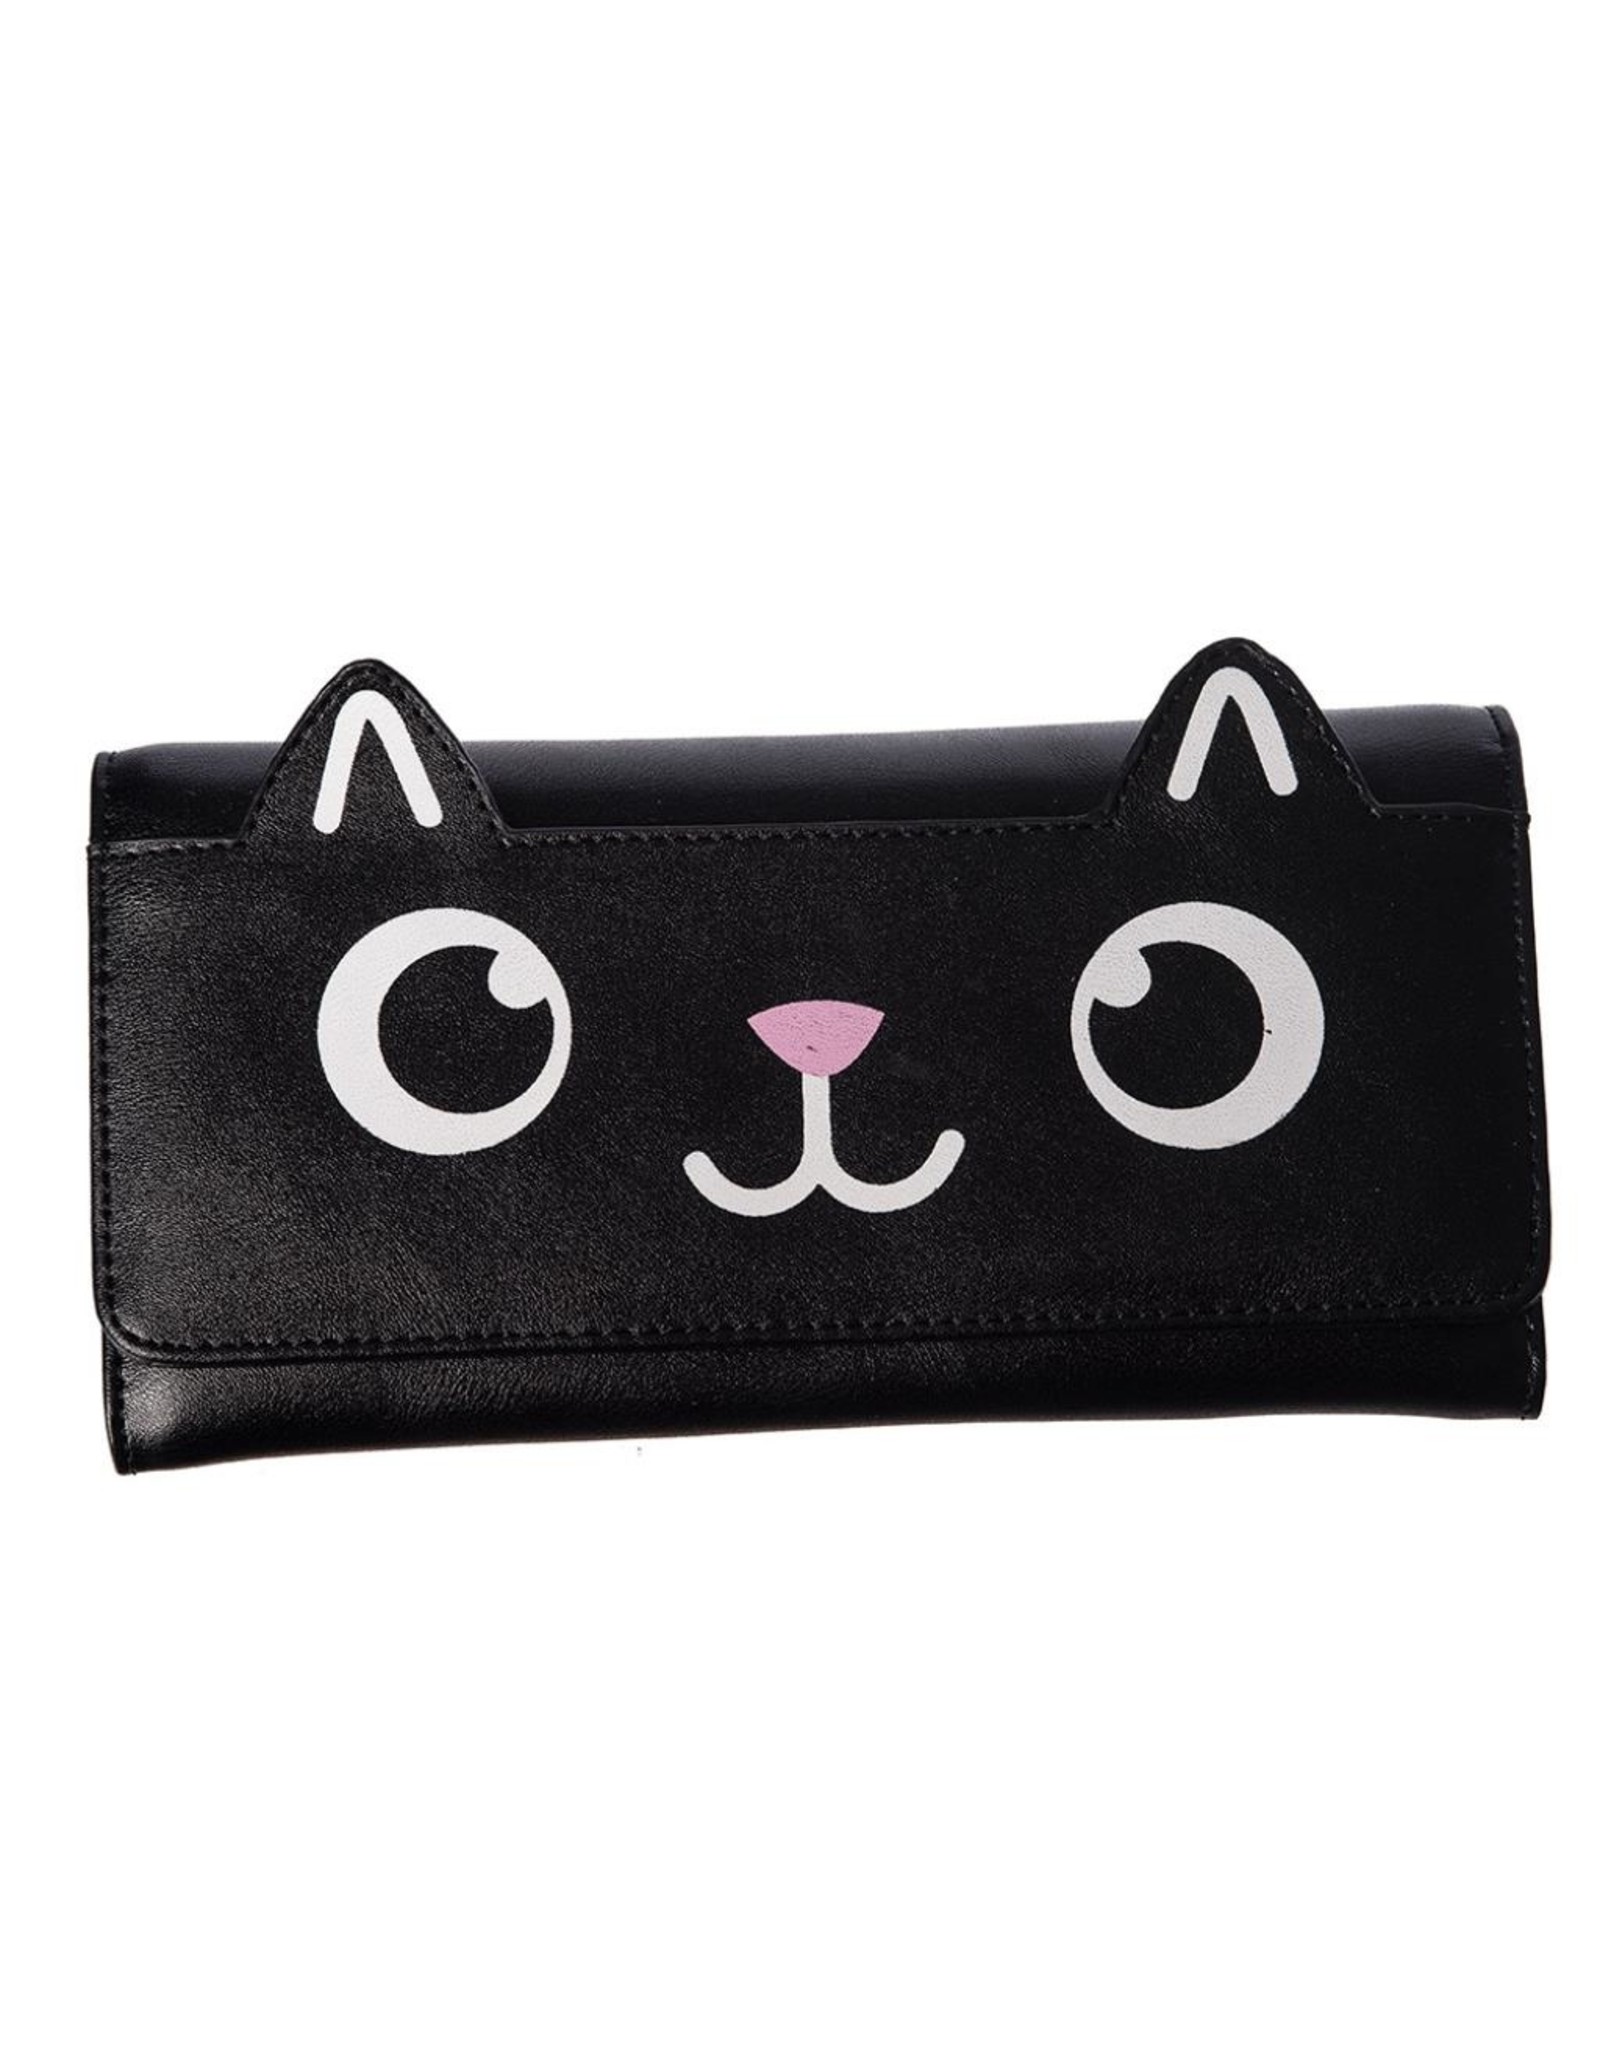 Banned Fantasy wallets and purses - Onix Wallet with Cat's Head